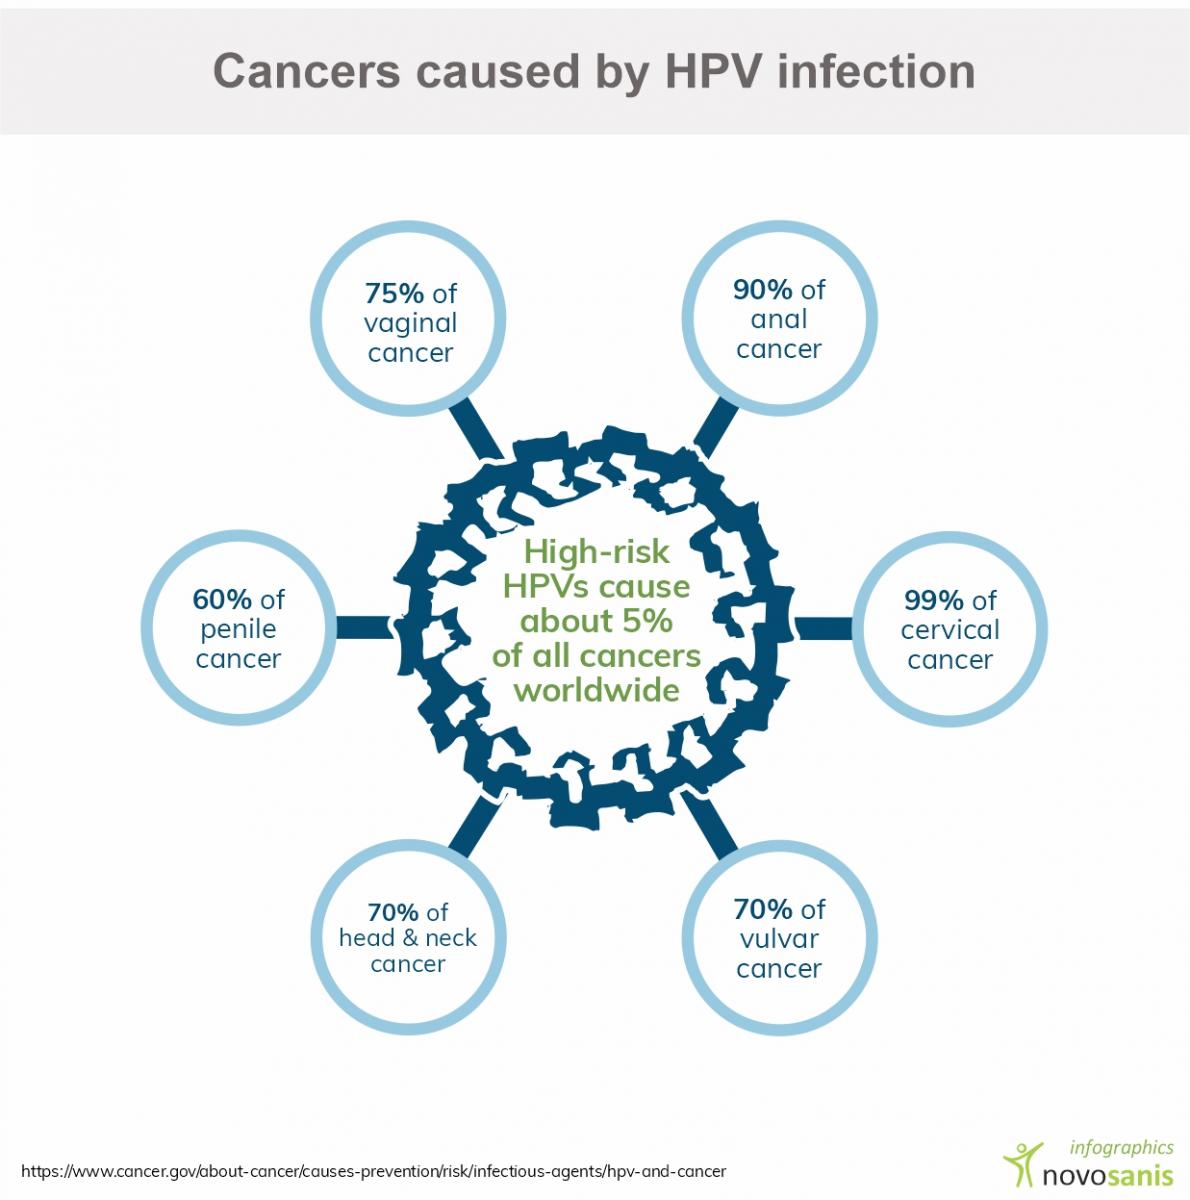 Cancers caused by HPV infection (infographic)